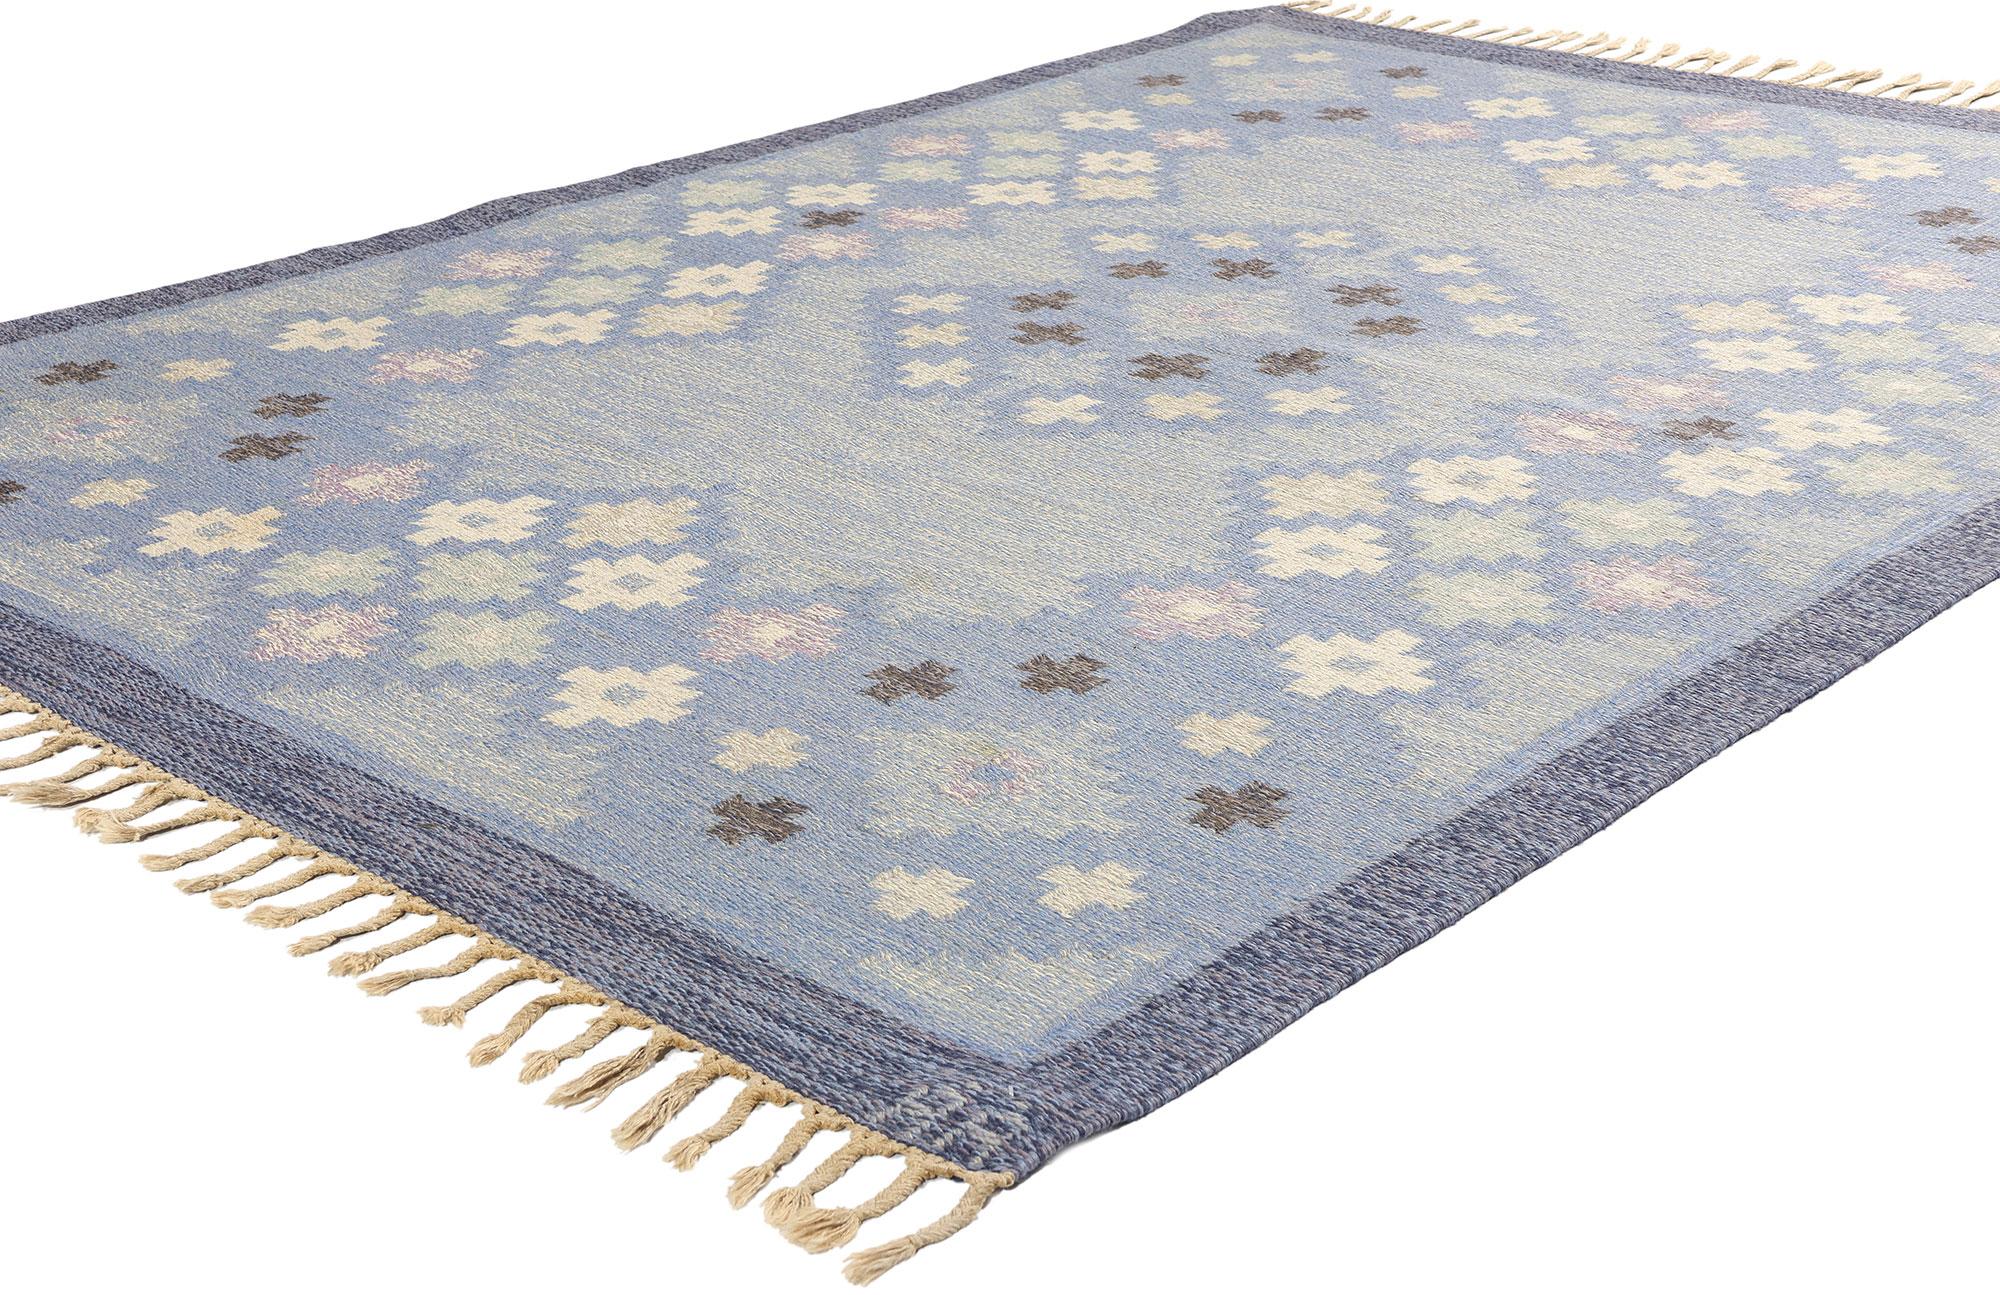 77036 Vintage Swedish Rollakan Rug by Asa Akerlund, 05'06 x 07'08. Asa Akerlund Swedish Rollakan rugs are a type of handwoven textile designed by Asa Akerlund, a Swedish textile artist. Rollakan rugs are characterized by their intricate geometric